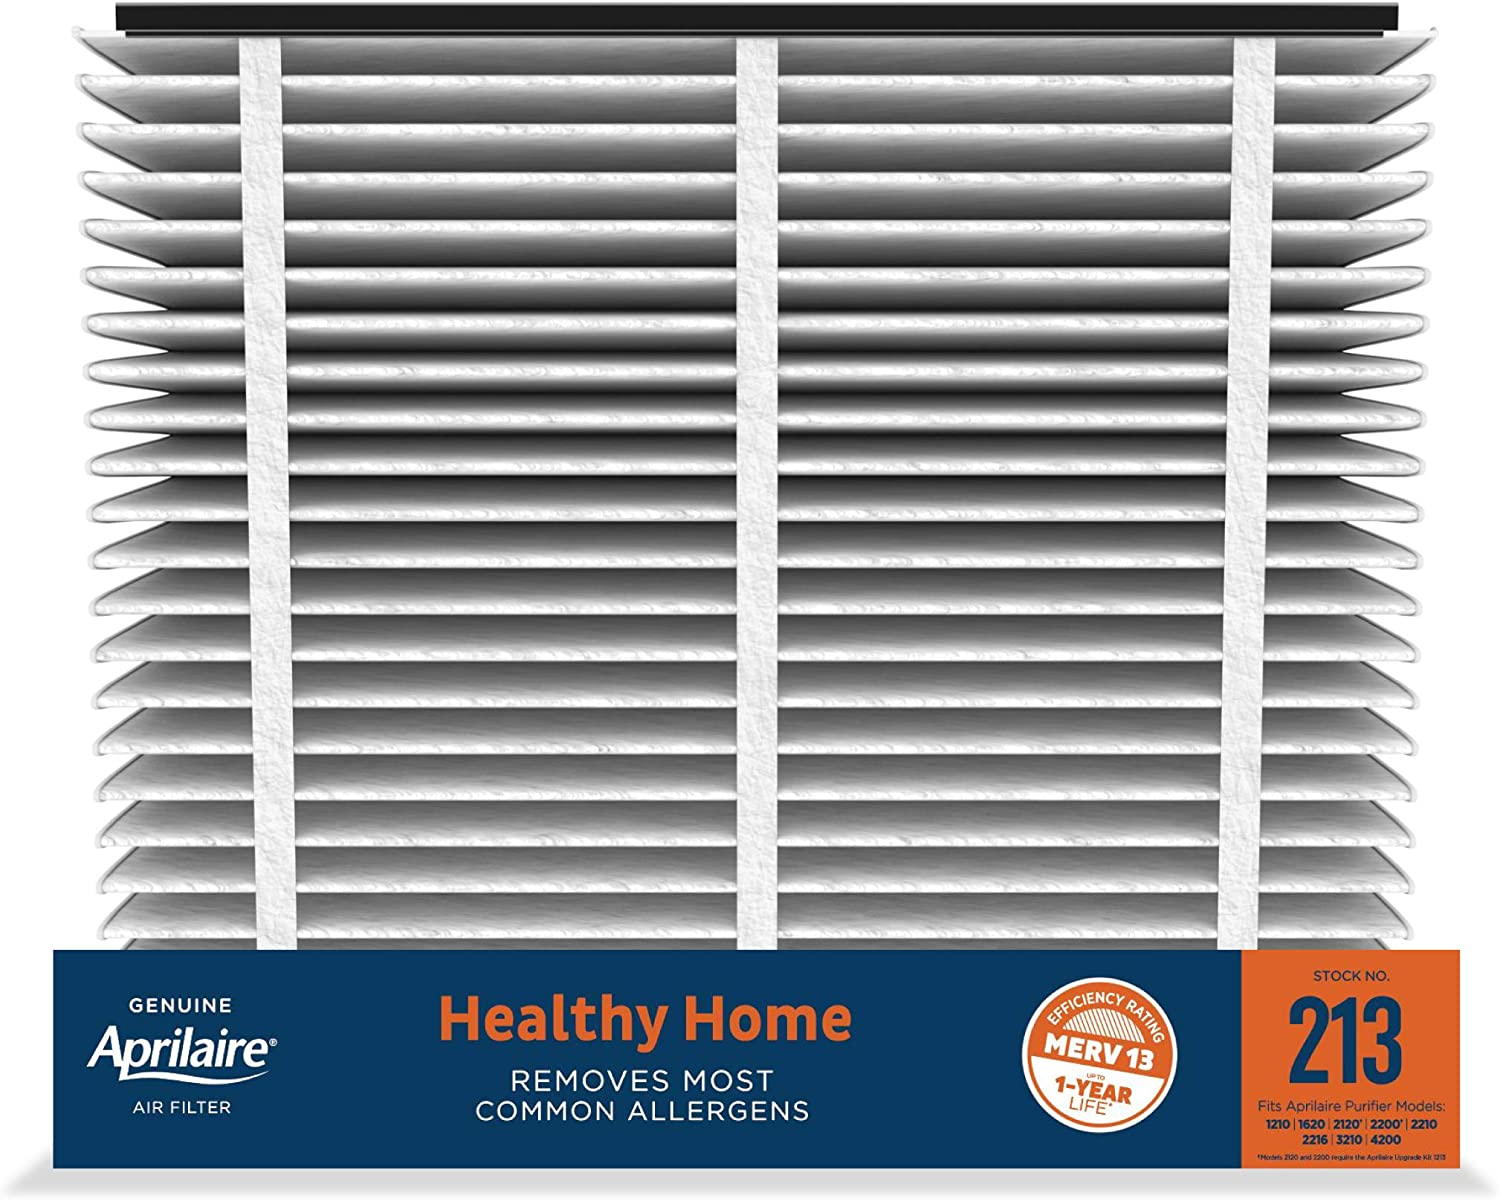 Aprilaire 213 “Healthy Home” Air Filter